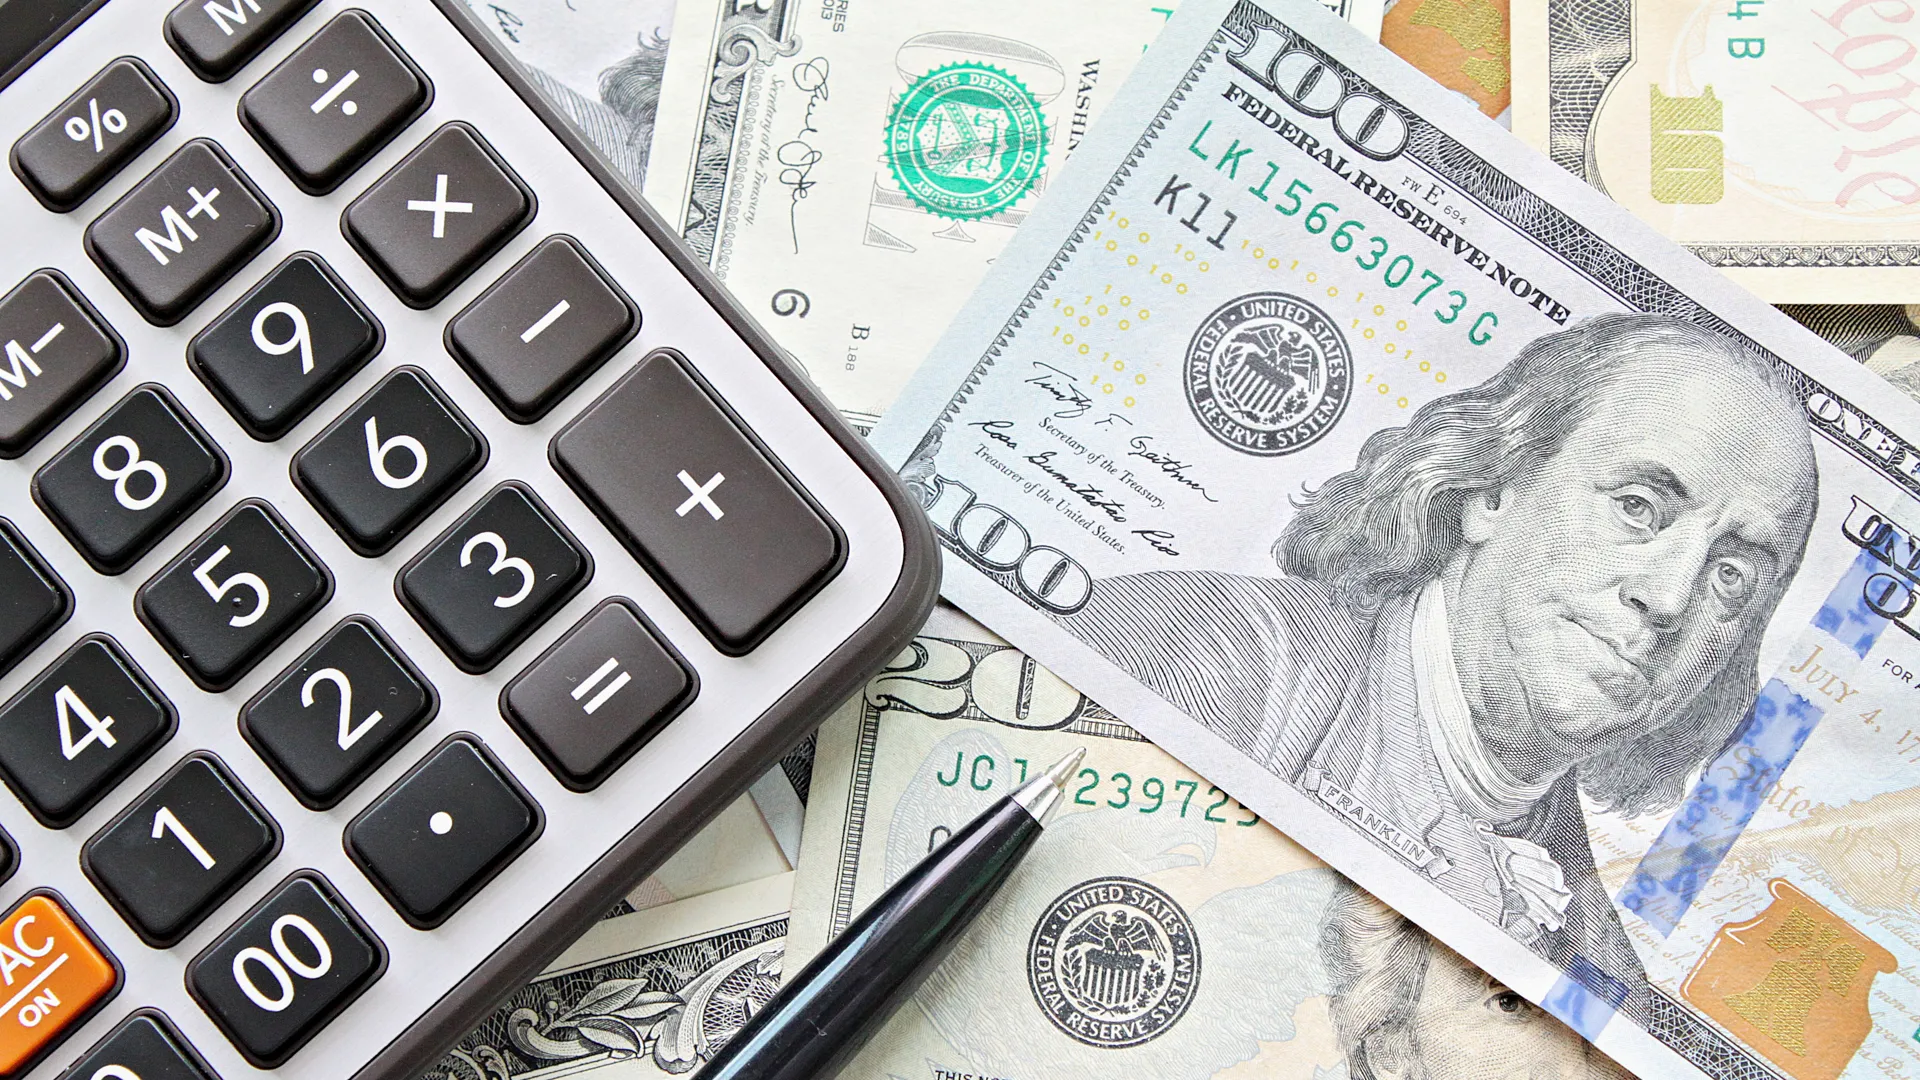 Business, finance, investment, accounting, taxes or money exchange concept : Top view or flat lay of calculator and pen on American Dollars cash money.